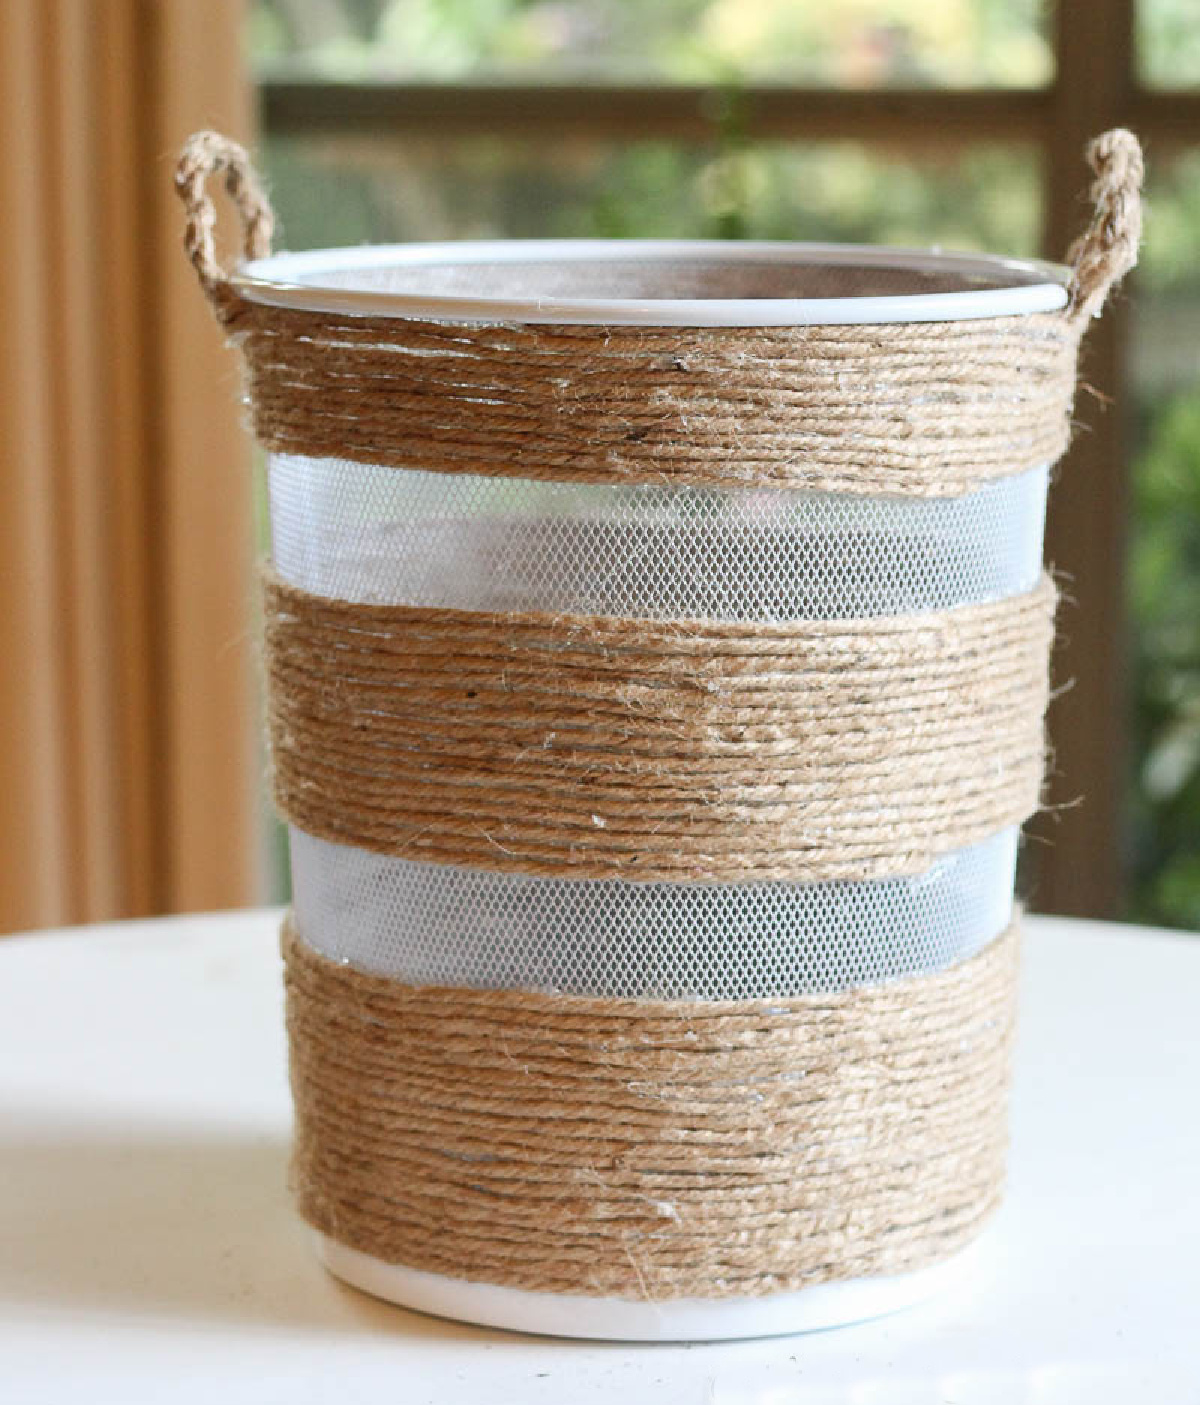 3 Easy Jute Craft Ideas/Rustic Home Decor Using Jute Twine Or Rope/Twine It  Up Challenge 